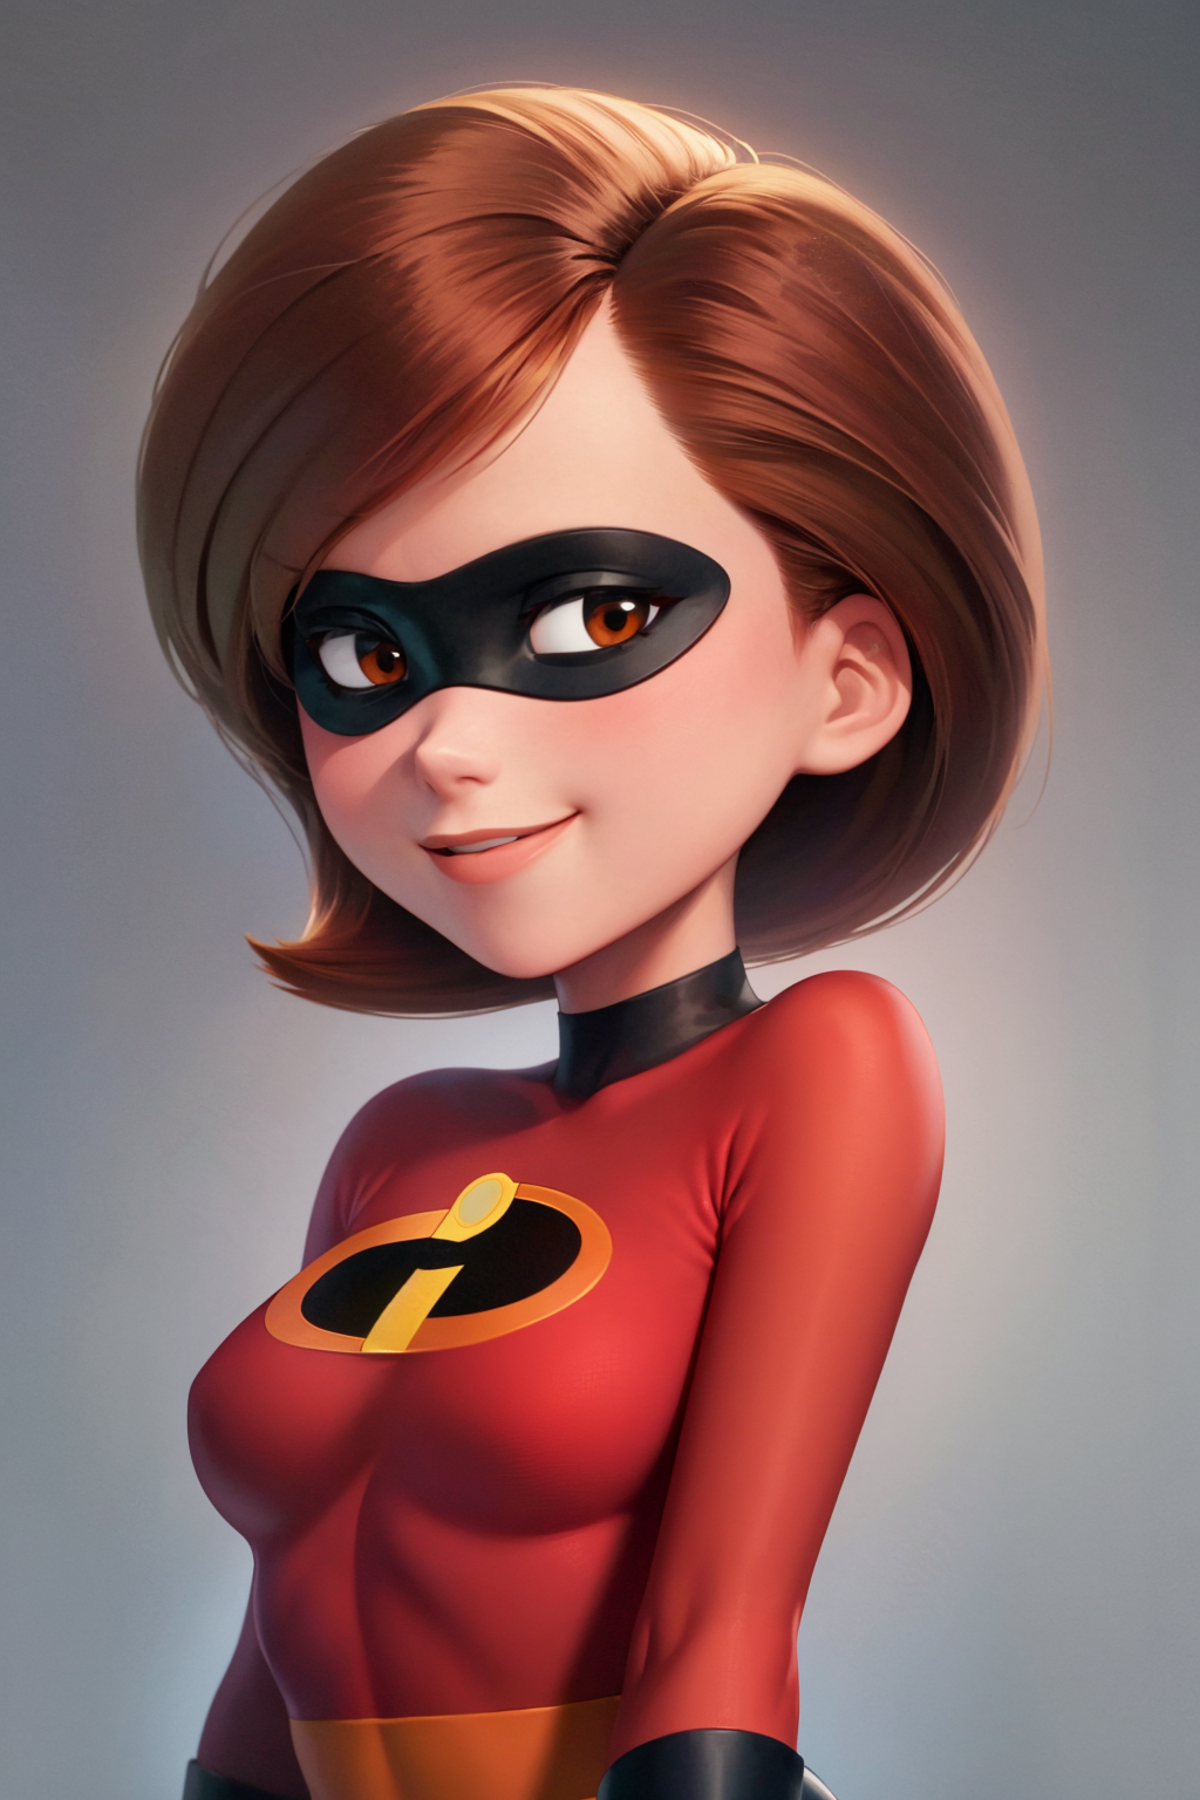 A cartoon female character with a mask and a red shirt.